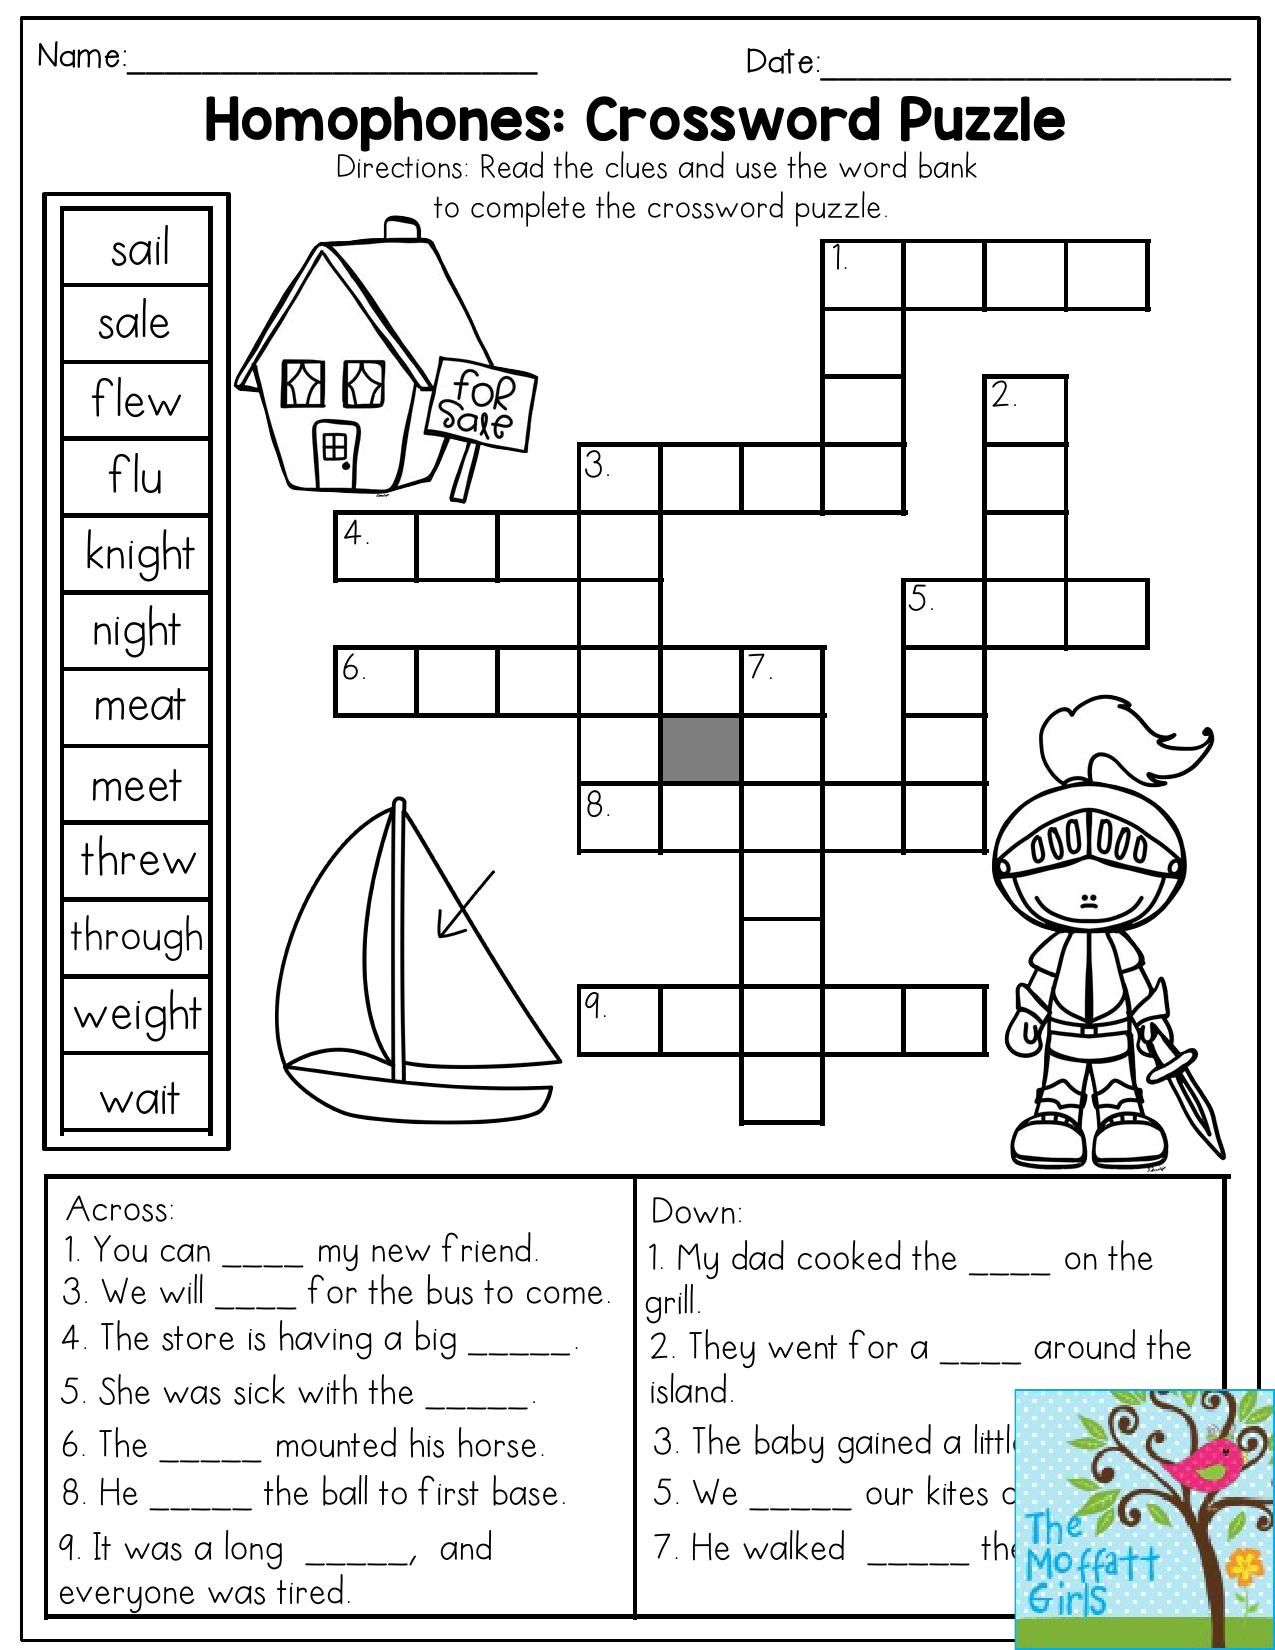 Homophones: Crossword Puzzle- Read The Clues And Use The Word Bank - Printable Crossword Puzzle Grade 3